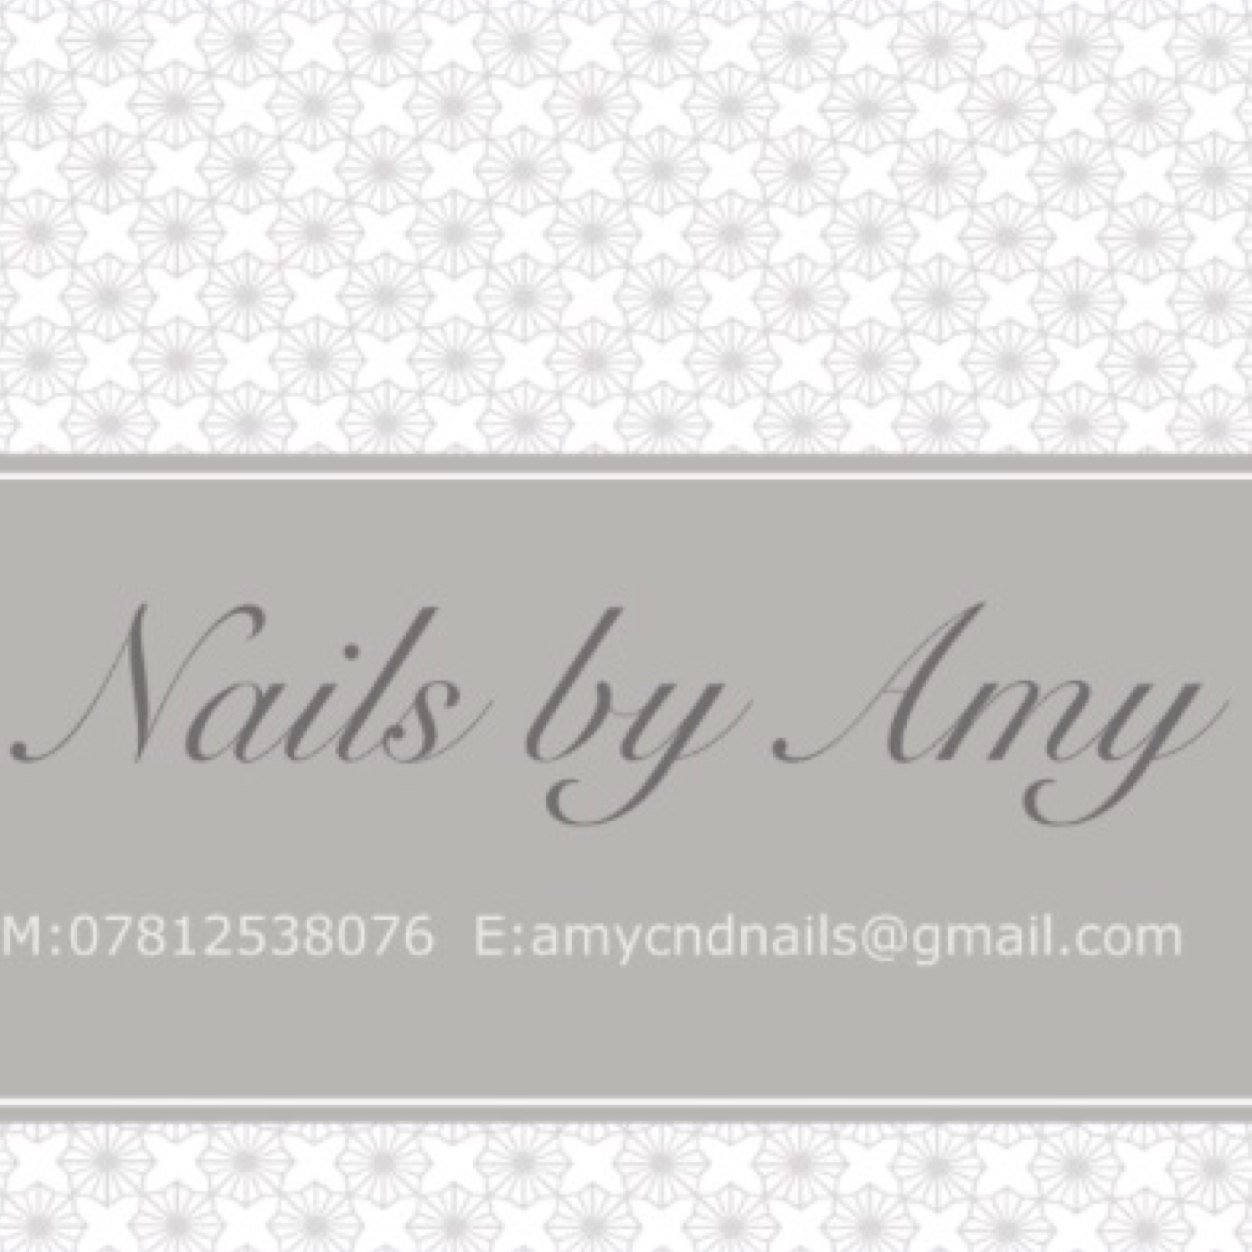 CND Master Nail Technician Liverpool. Nails & Beauty @ HaloHairRoom 212 Smithdown rd L15 3JT Book in 👉🏼https://t.co/HsUJffPPr3